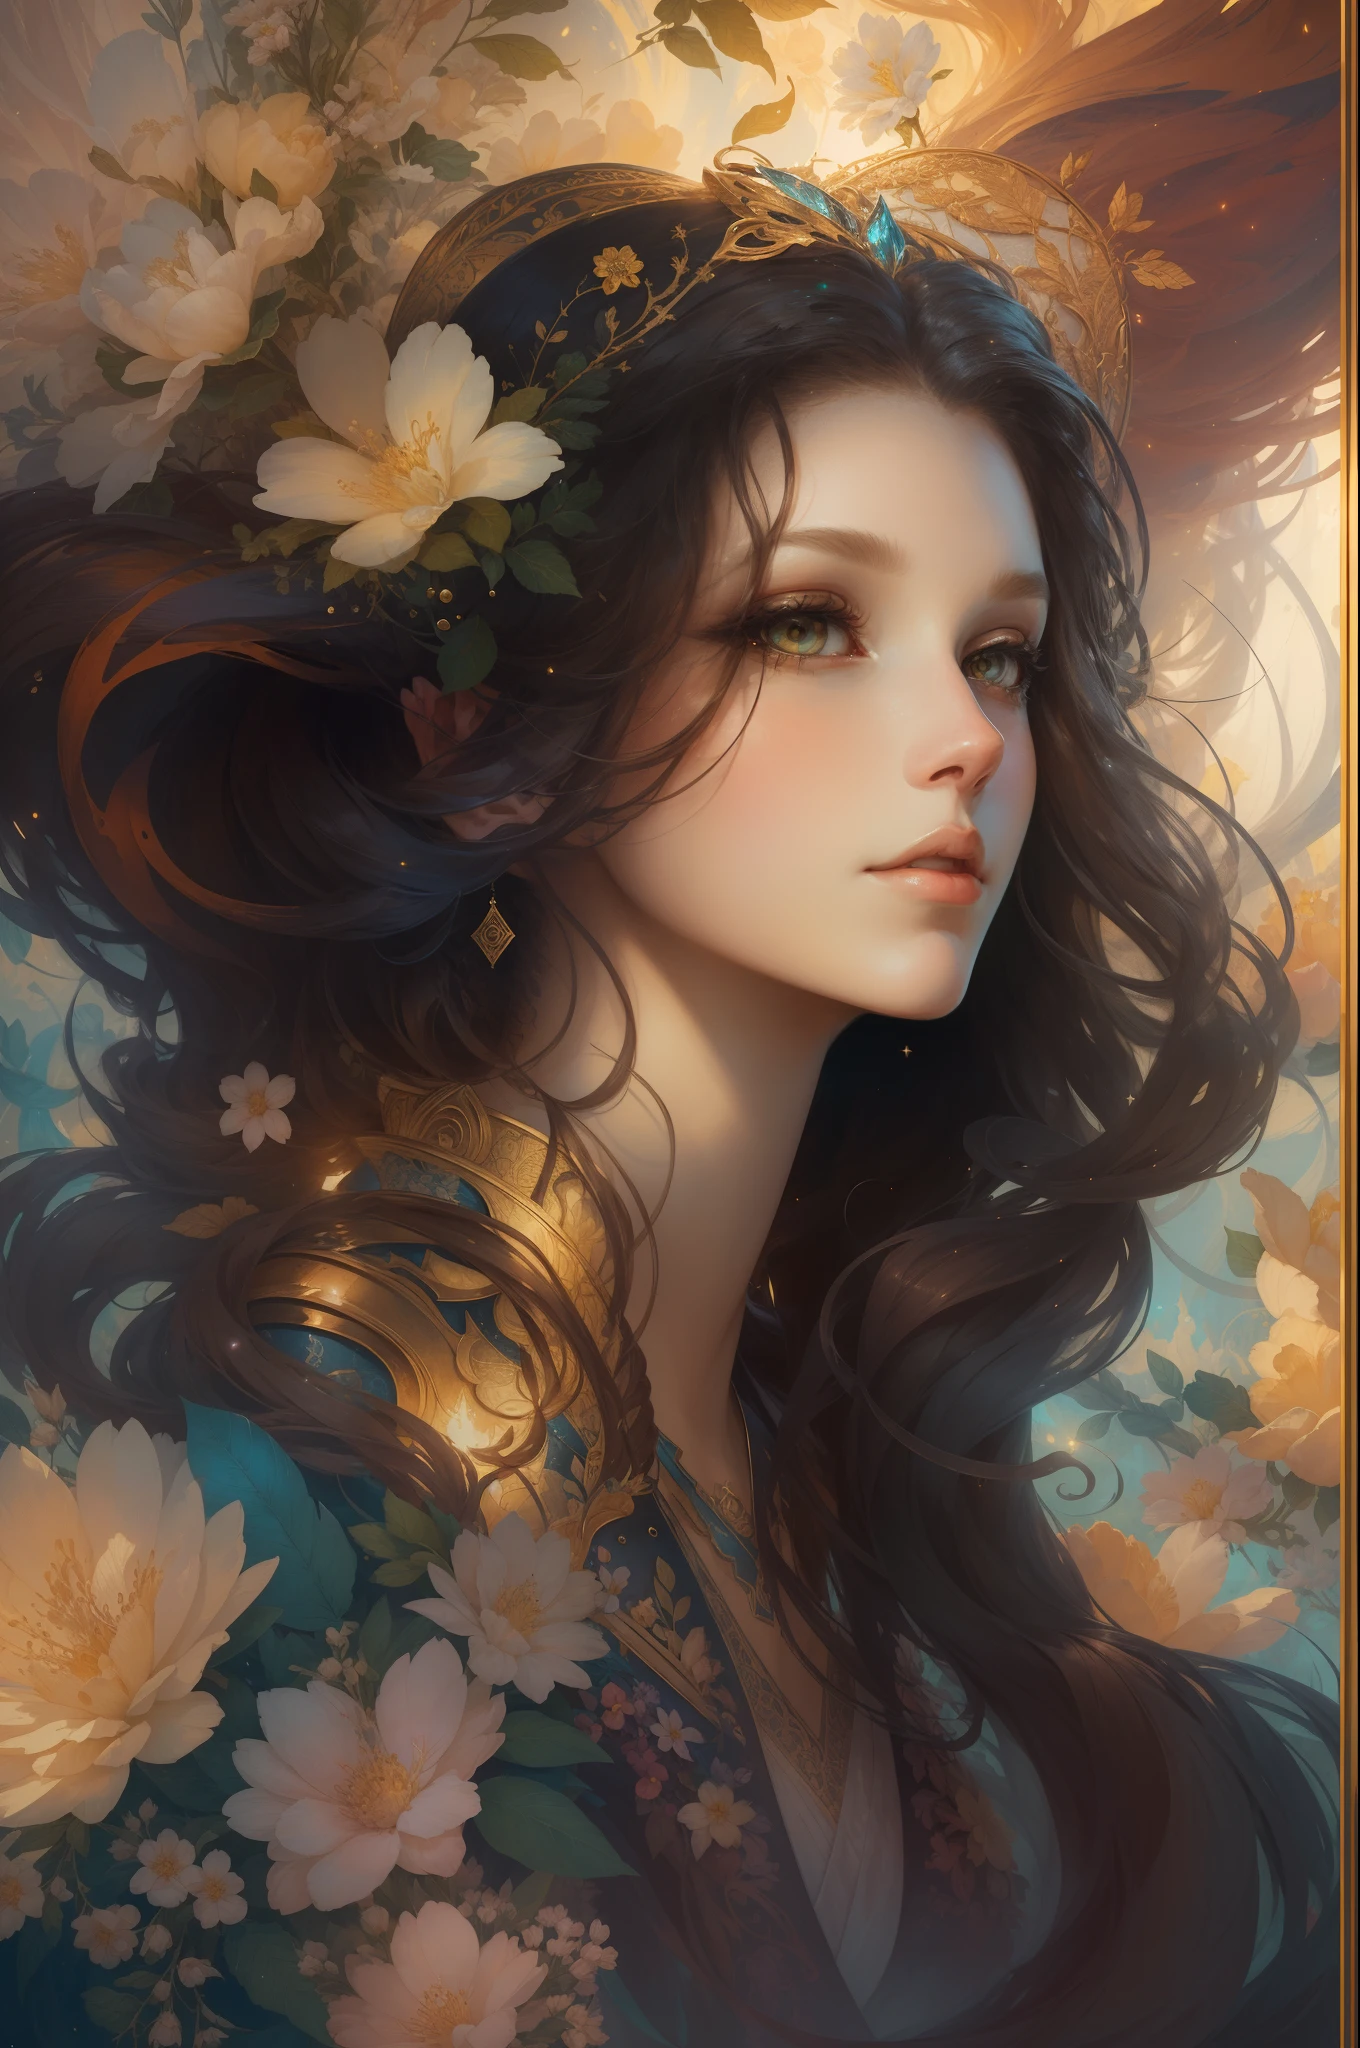 （（Gorgeous female princess）），（She has long flowing brown hair），（Bright and beautiful eyes），trendding on artstation，Flowers of Hope by Jean-Honor Fragonard，Peter Mohrbacher，ultra-detailliert，insanely details, Amazing, complex, elite, Art Nouveau, a gorgeous, Liquid wax, elegant, Luxurious, greg rutkovsky, Ink style, a sticker, Vector art beautiful character design, Dual exposure shooting, Luminous design, winning artwork, tmasterpiece, AMOLED black background,optic